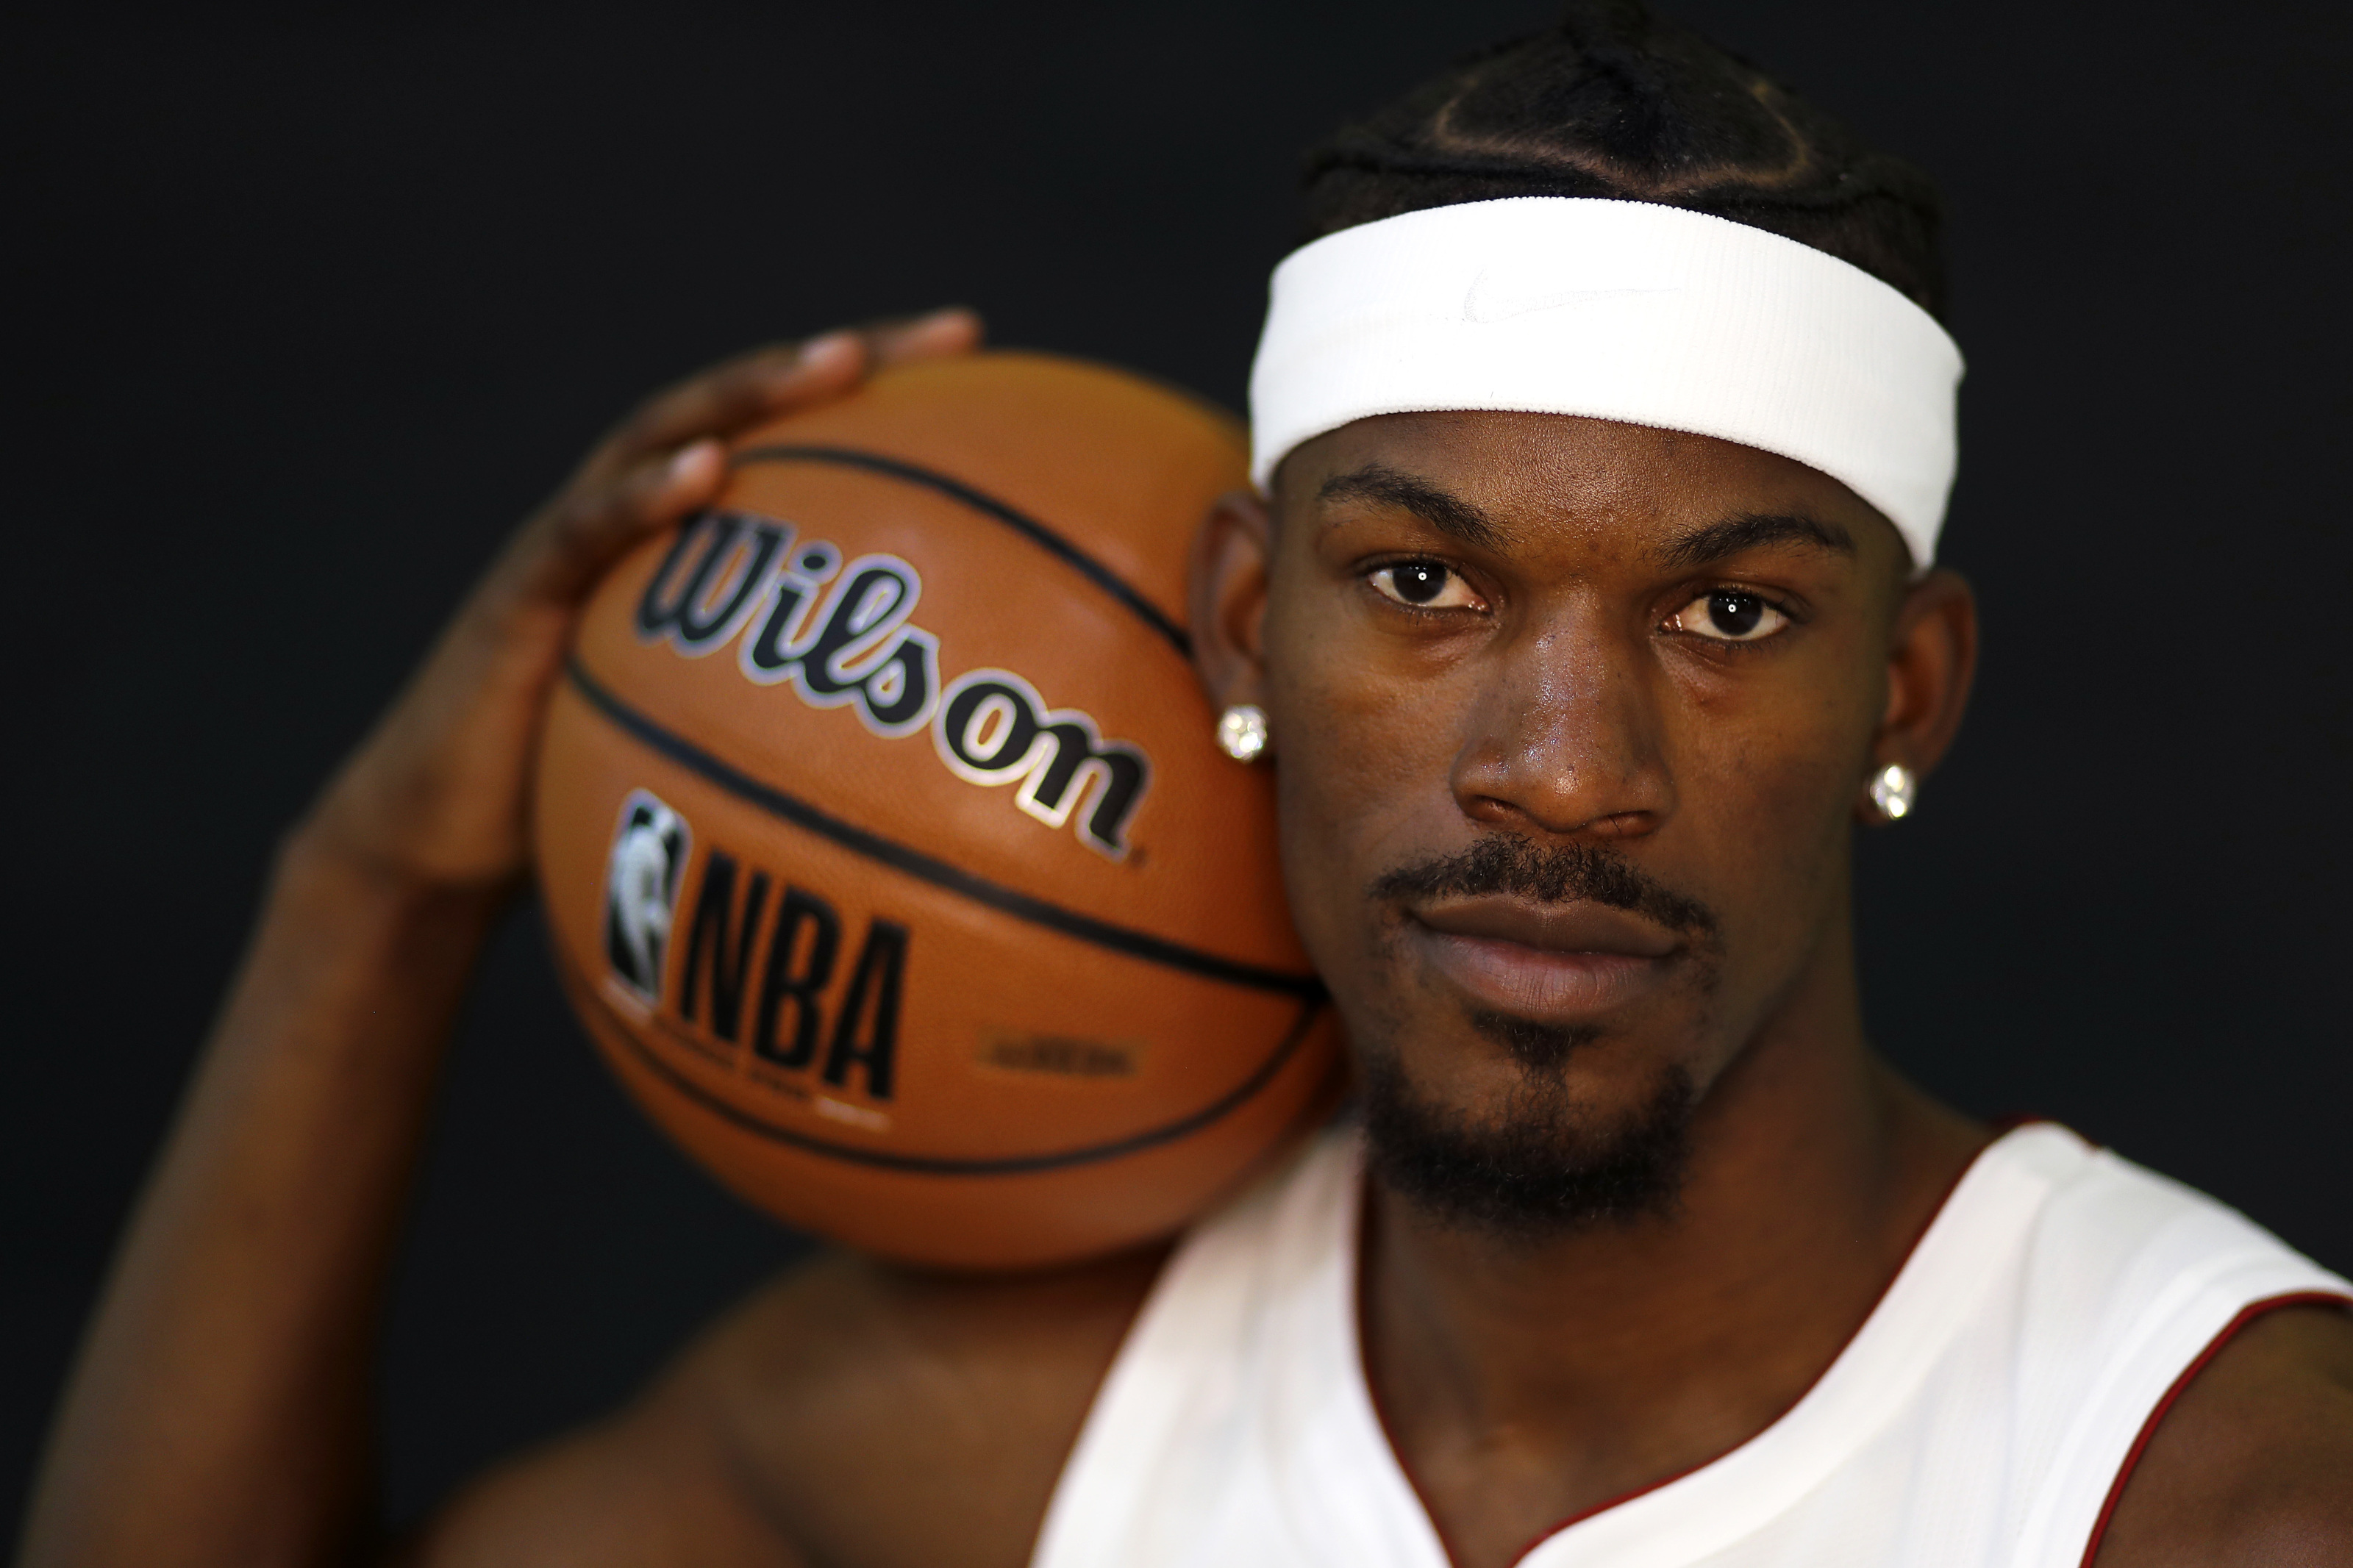 Miami Heat's Jimmy Butler (22) poses during the NBA basketball